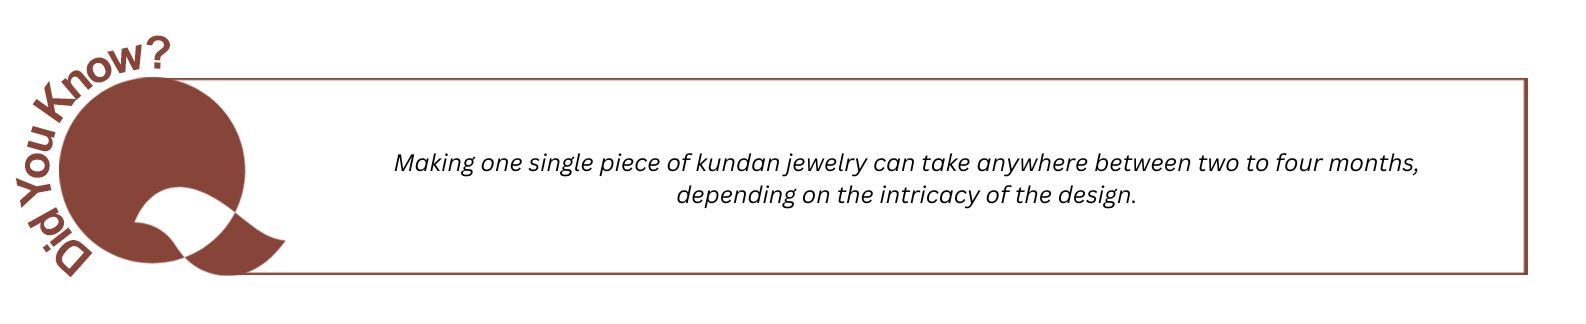 To make one single piece of kundan jewelry can take anywhere between two to four months, depending on the intricacy of the design.